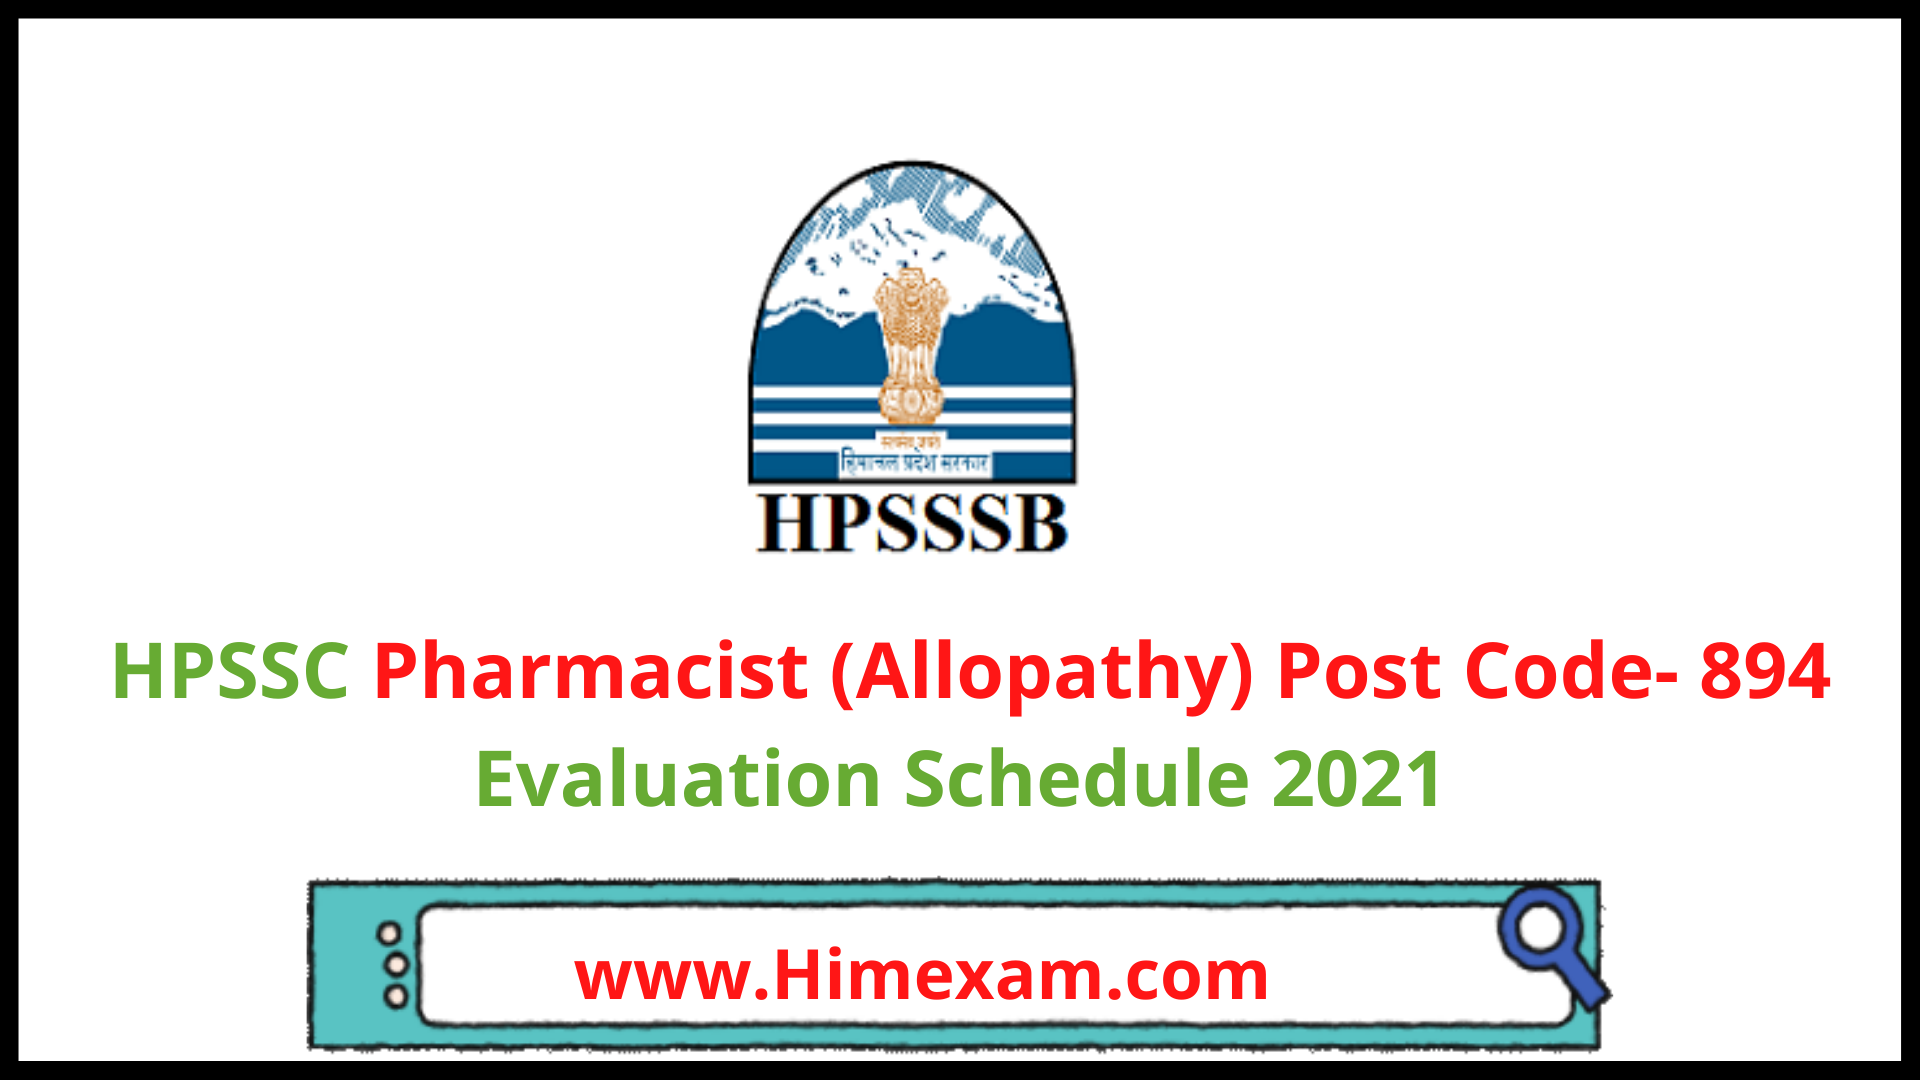 HPSSC Pharmacist (Allopathy) Post Code- 894 Evaluation Schedule 2021